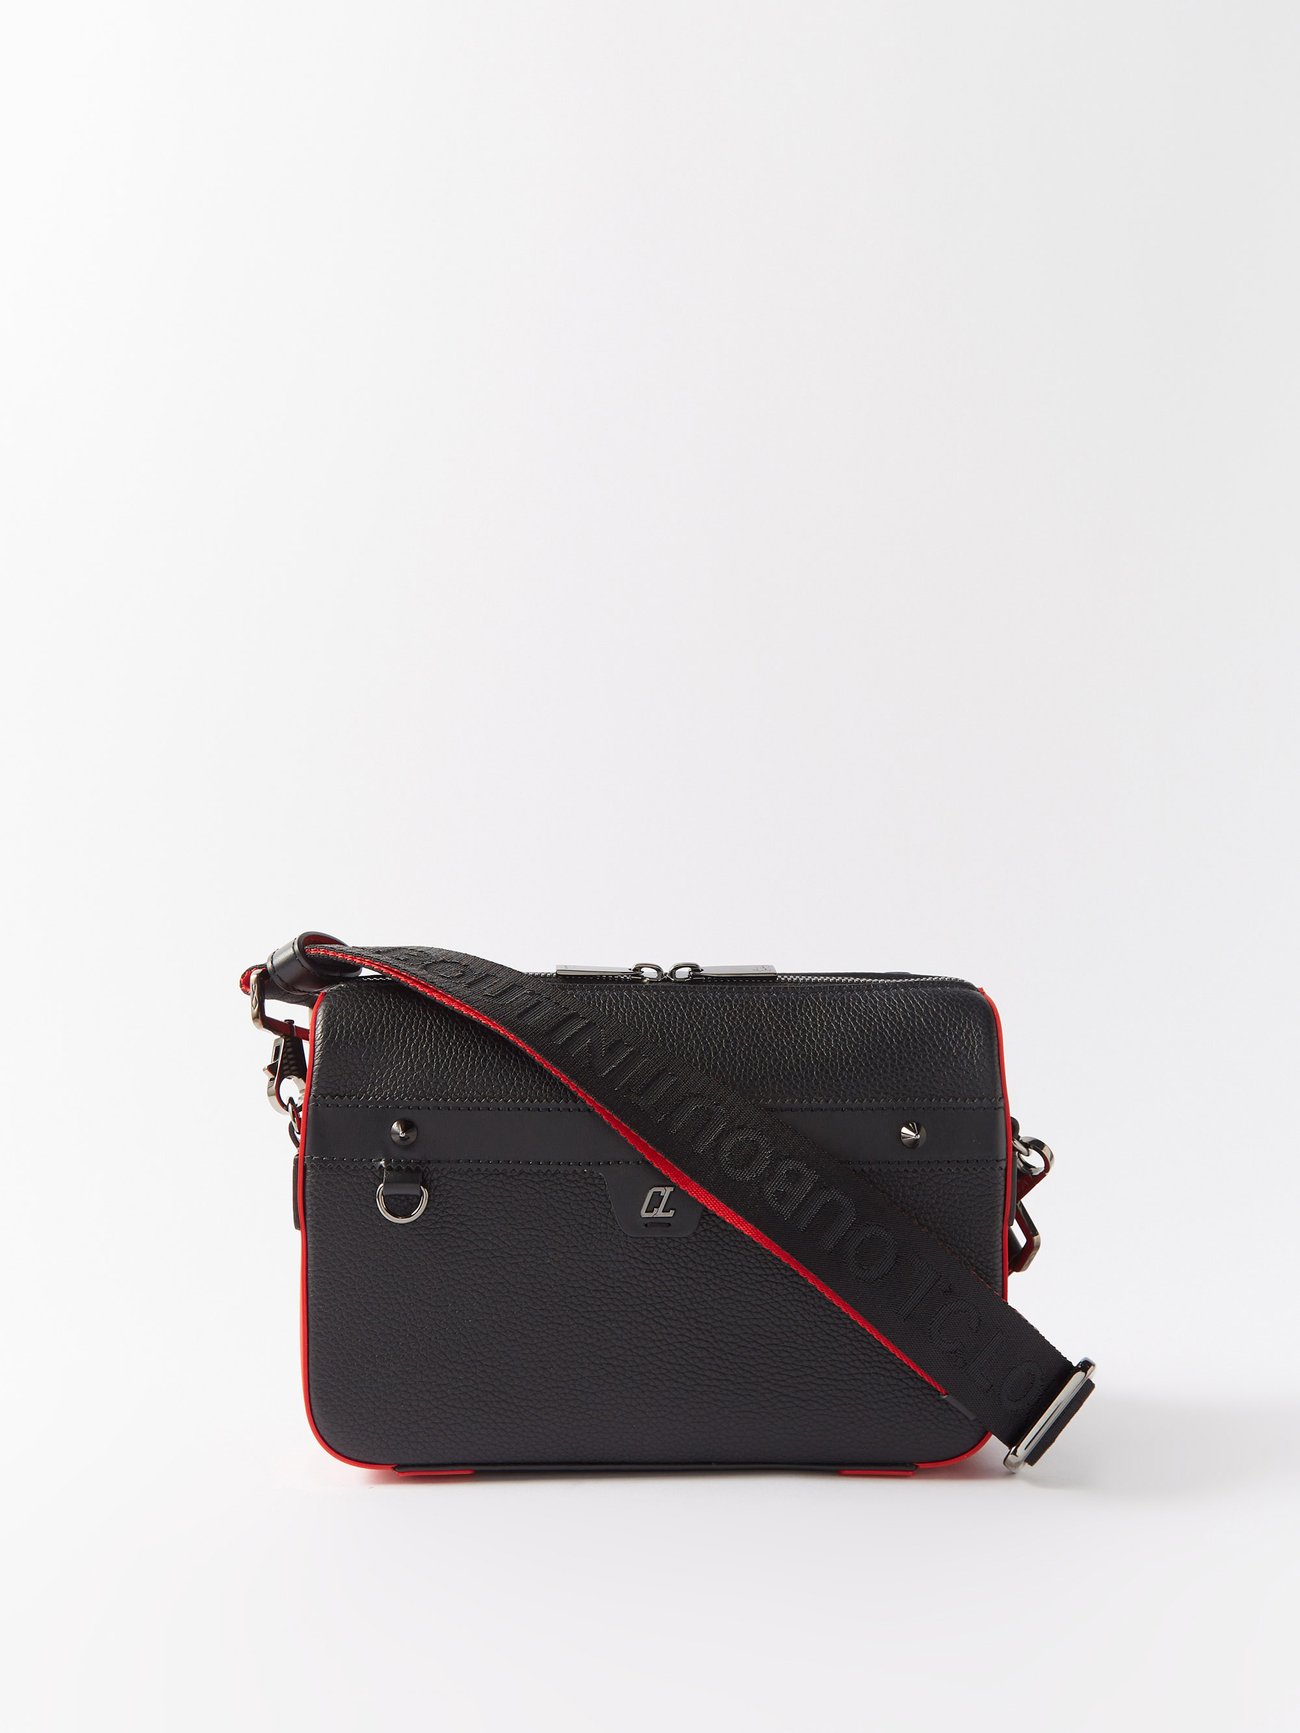 Vintage Christian Louboutin Crossbody Bags and Messenger - 3 For